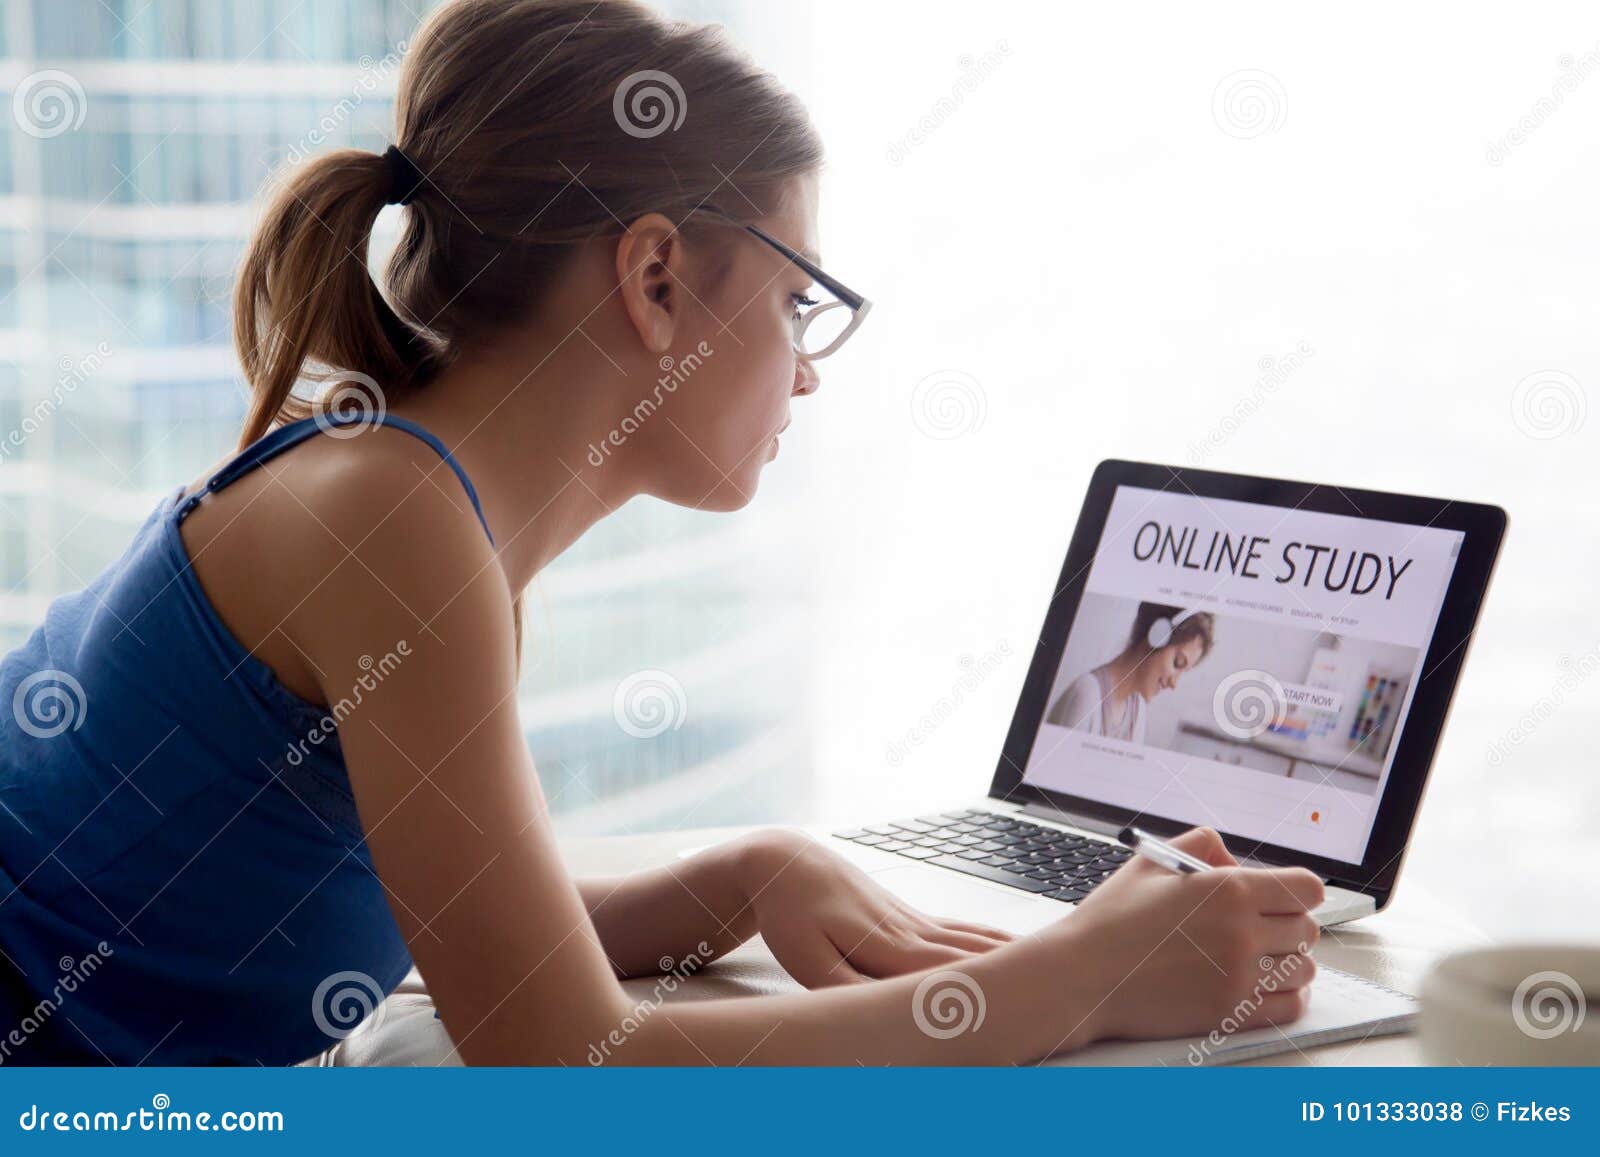 woman studying online educational course on internet using lapto